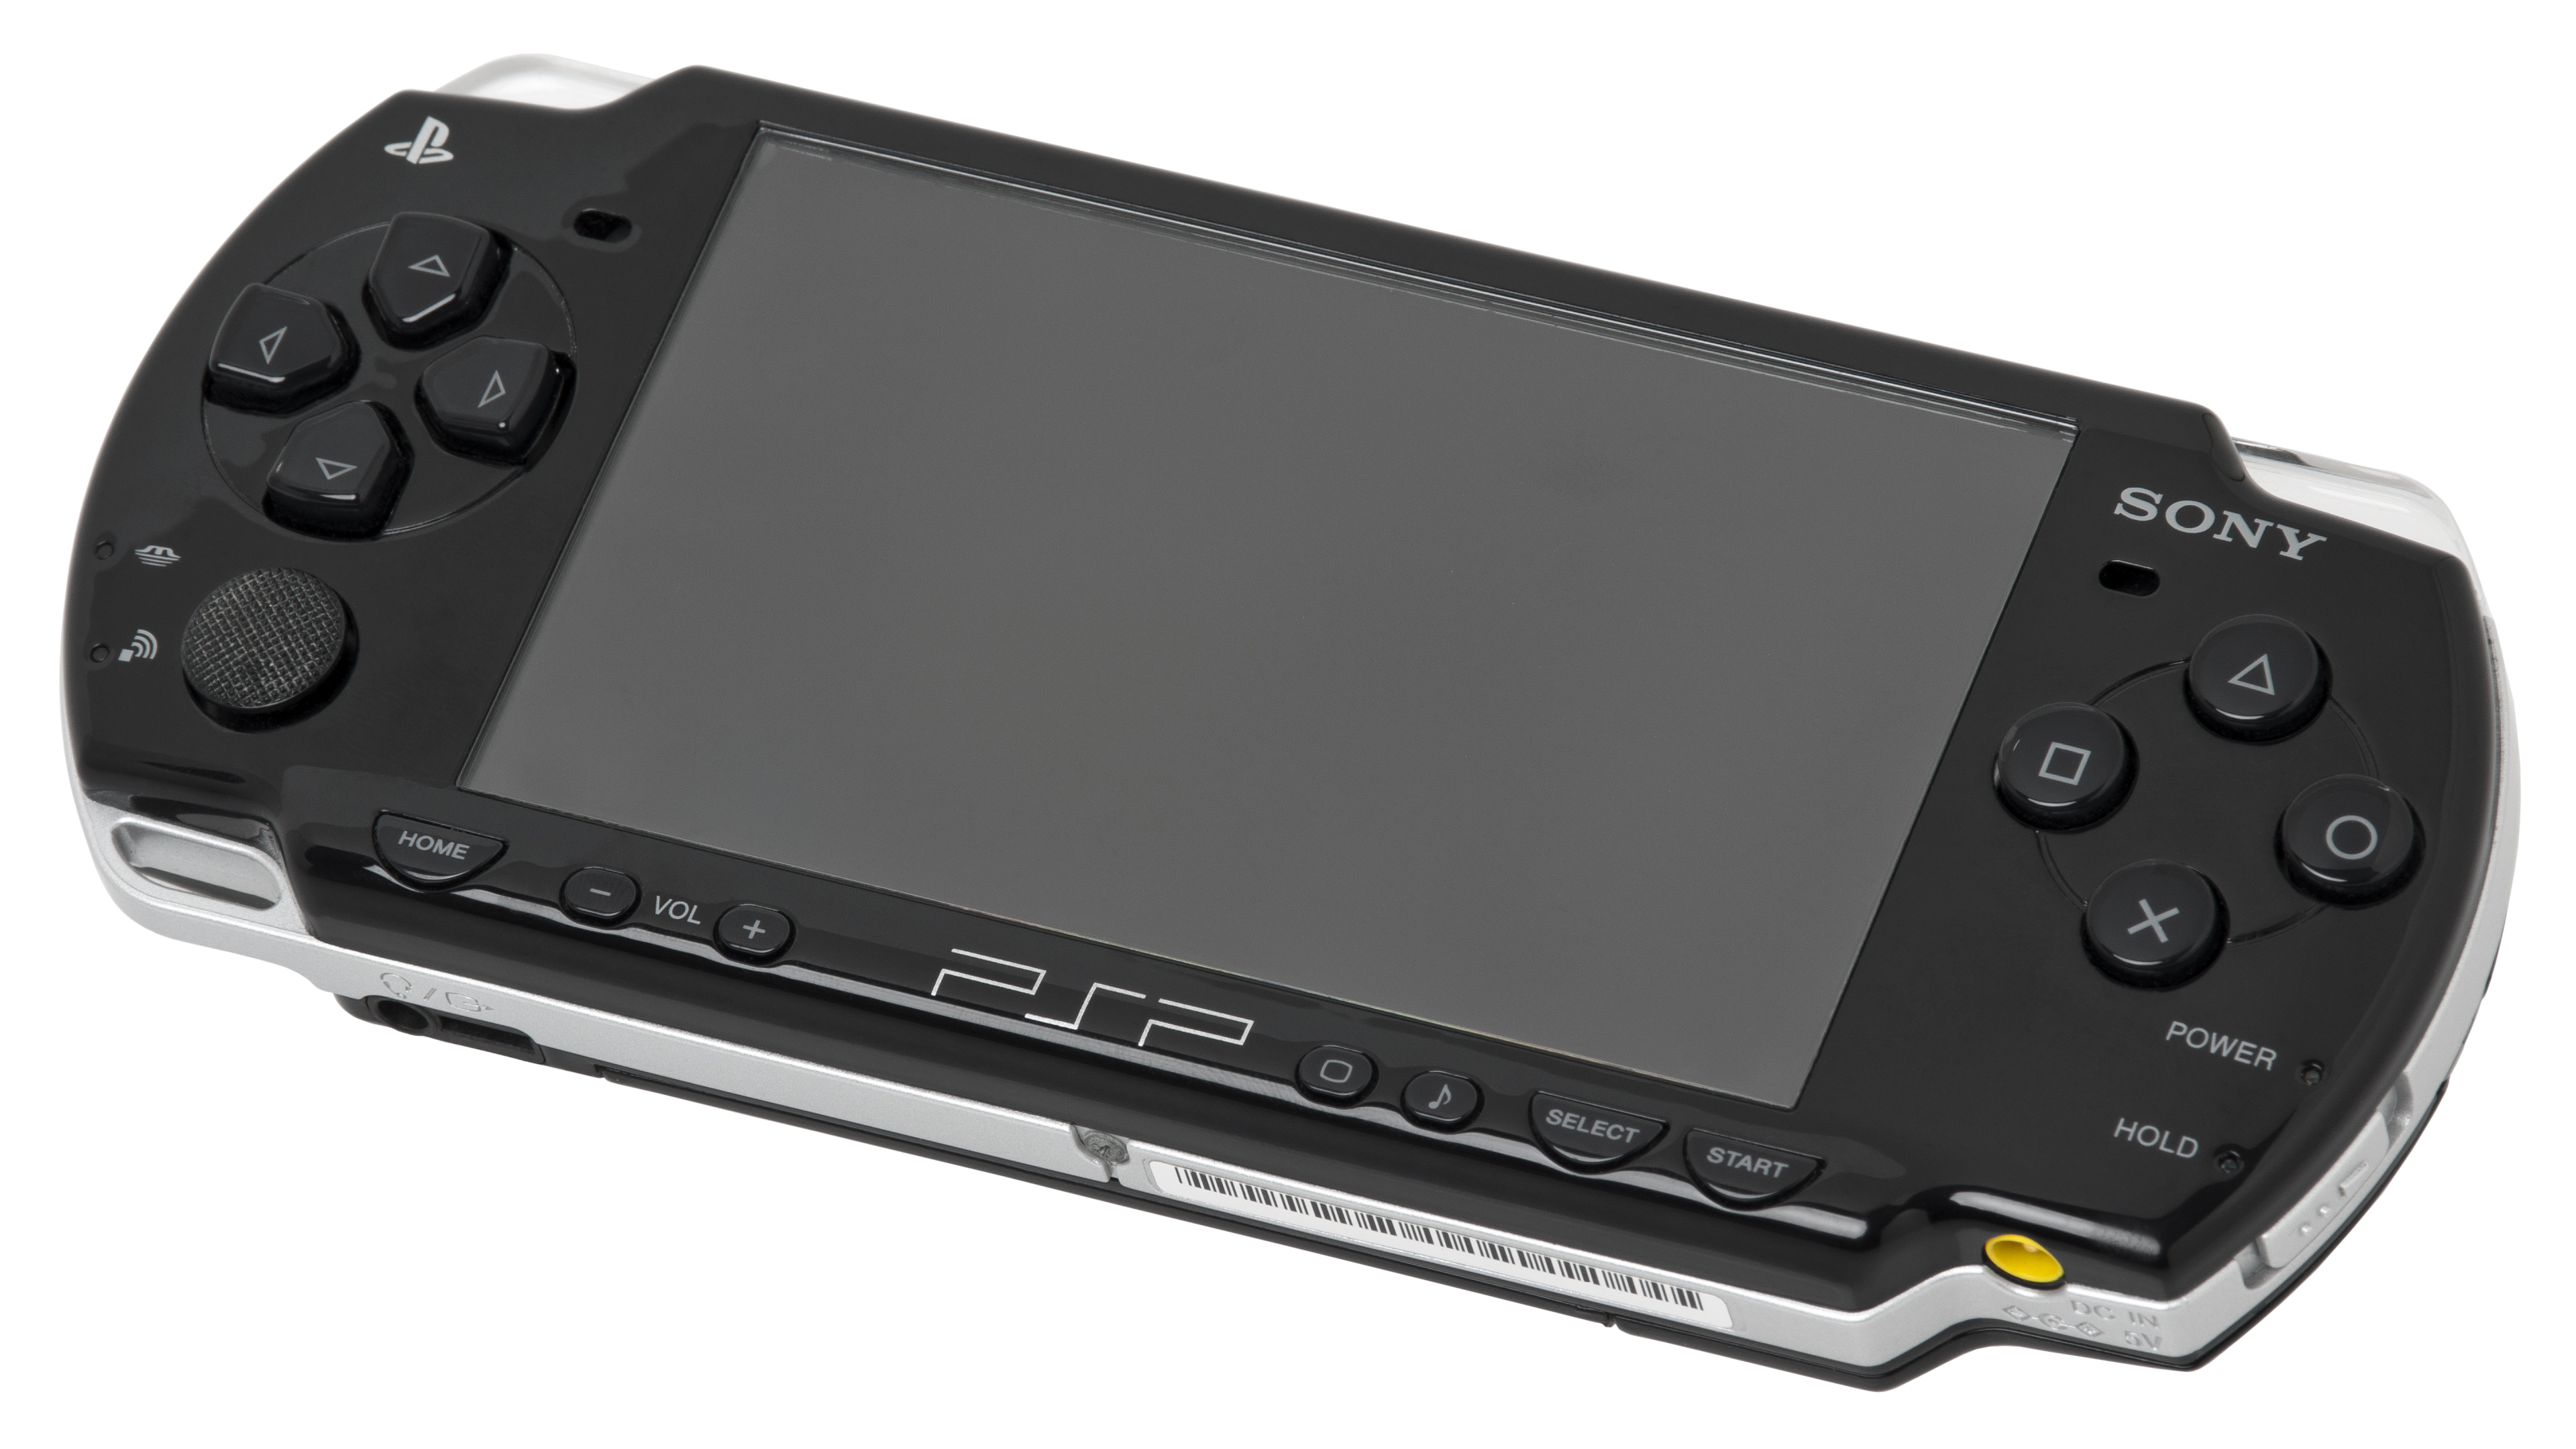 Sony Playstion Portable (PSP) CFW